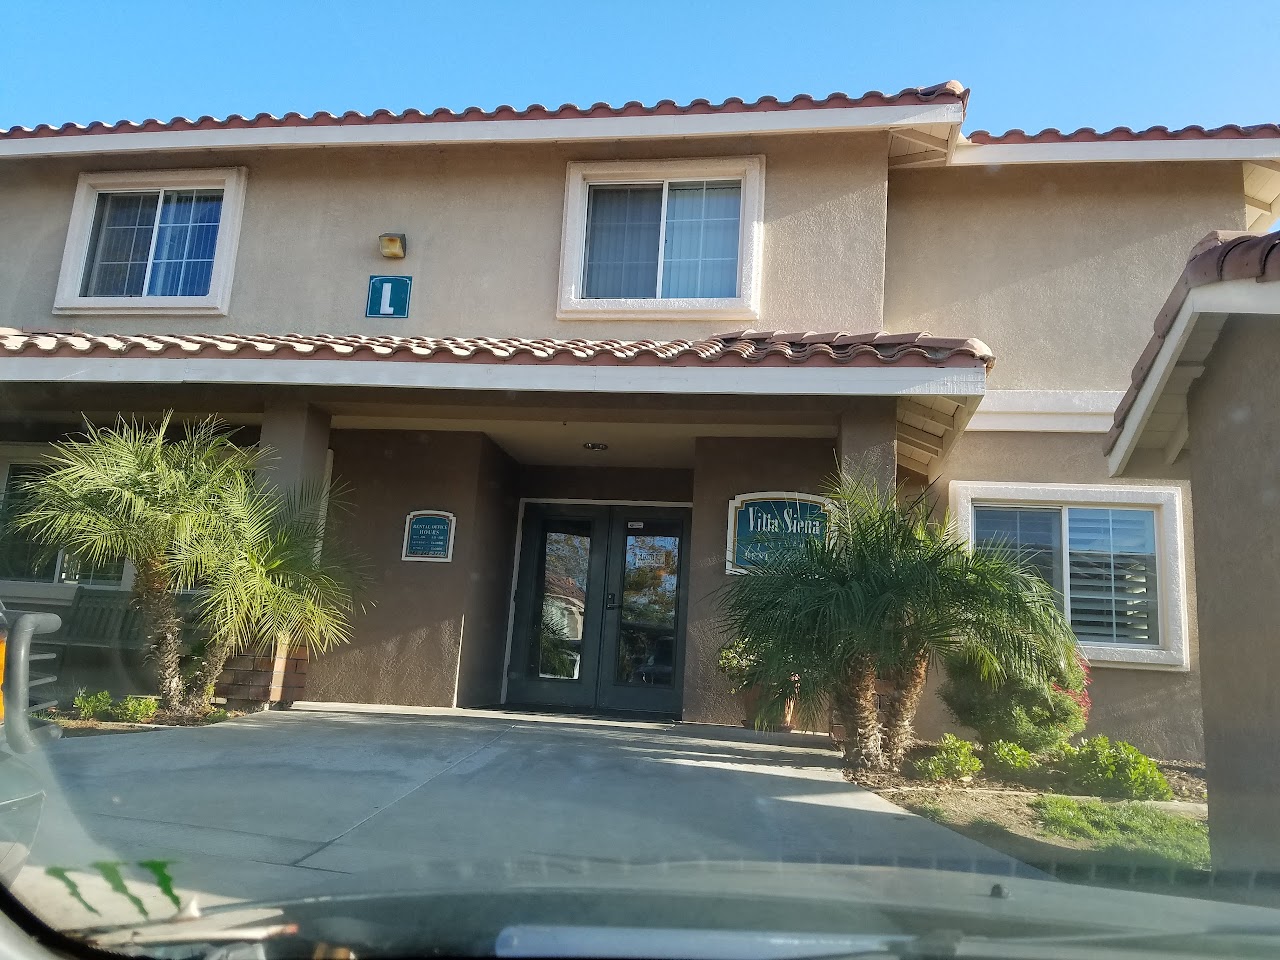 Photo of VILLA SIENA APTS. Affordable housing located at 31300 AUTO CTR DR LAKE ELSINORE, CA 92530